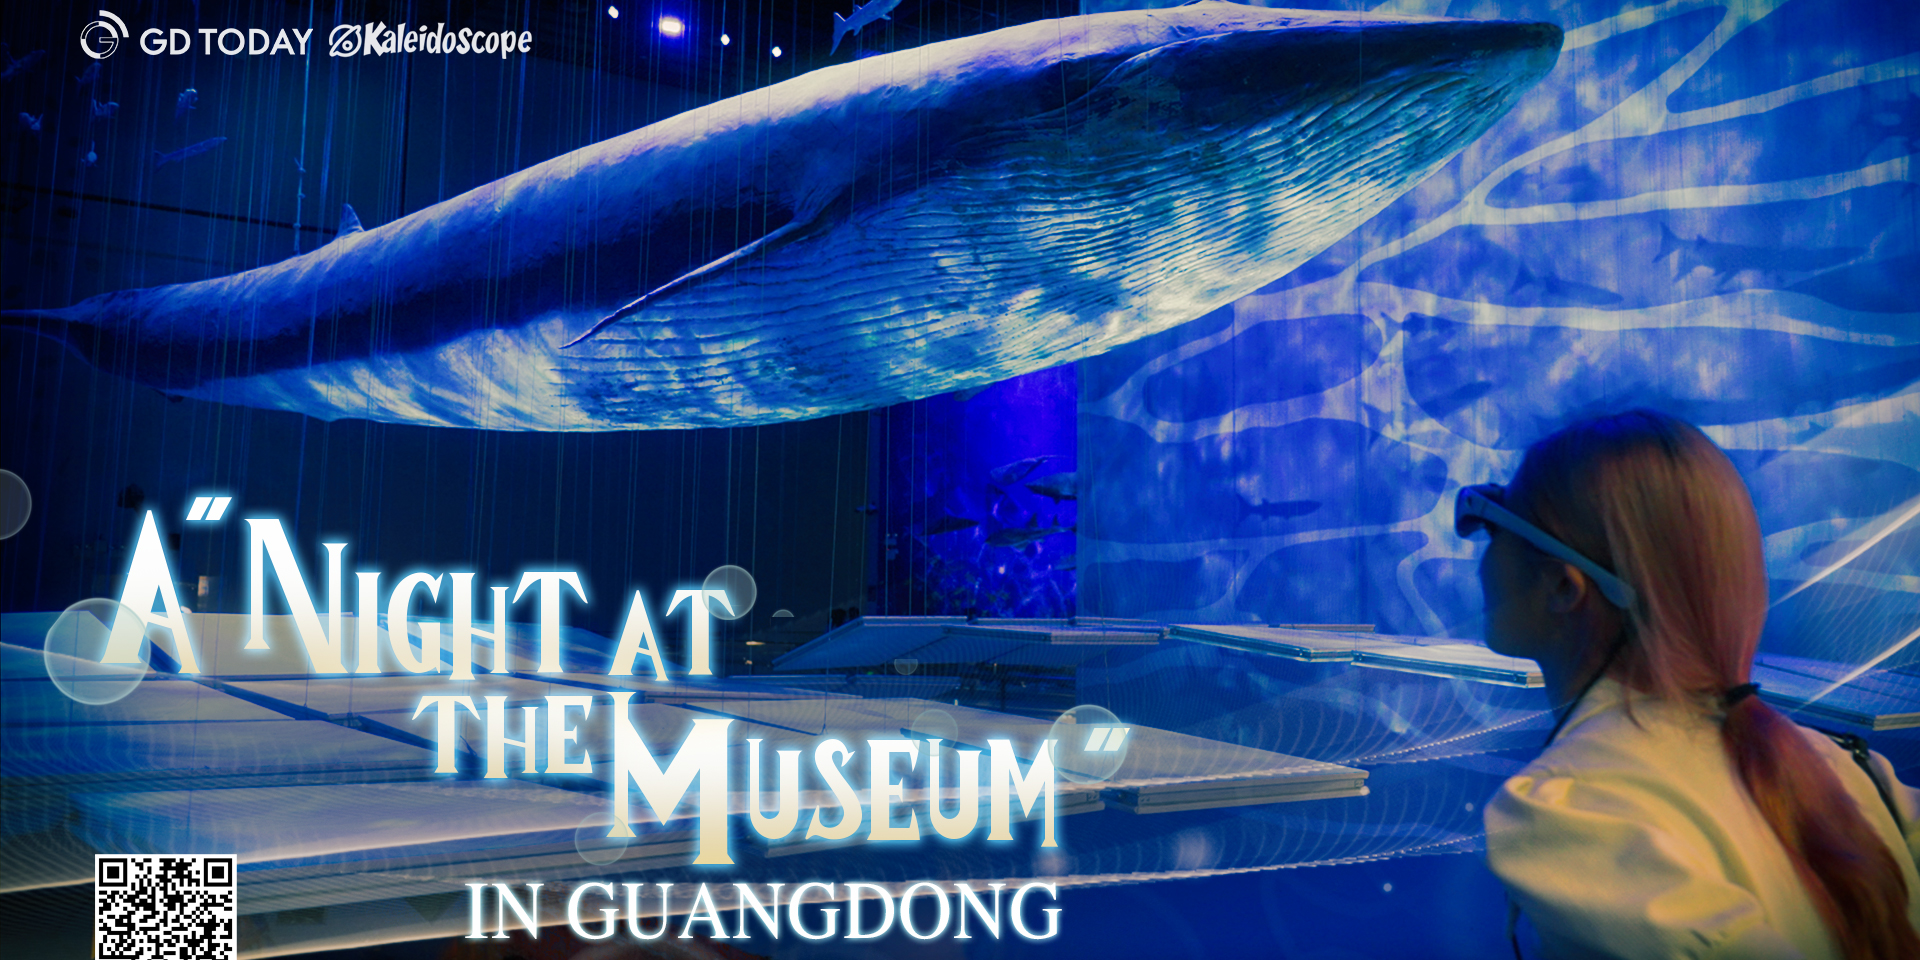 Check out a "Night at the Museum" in Guangdong